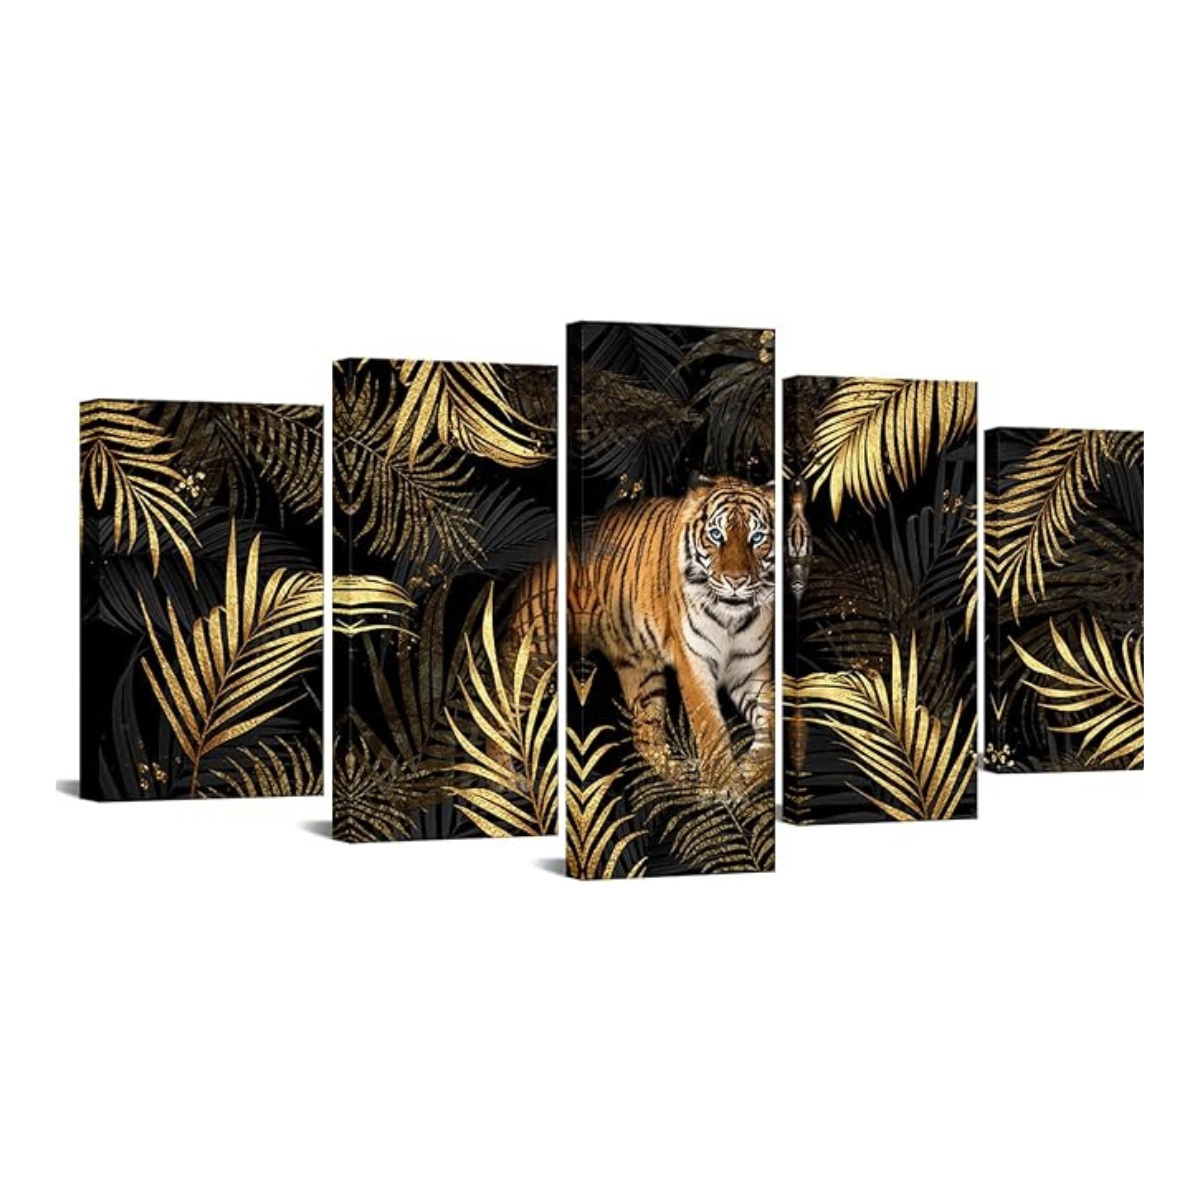 sechars 5 Panel Animal Canvas Wall Art Retro Tiger with Blue Eyes Picture Prints Vintage Wildlife Poster Artwork for Home Office Living Room Kitchen Decoration Ready to Hang (Medium)